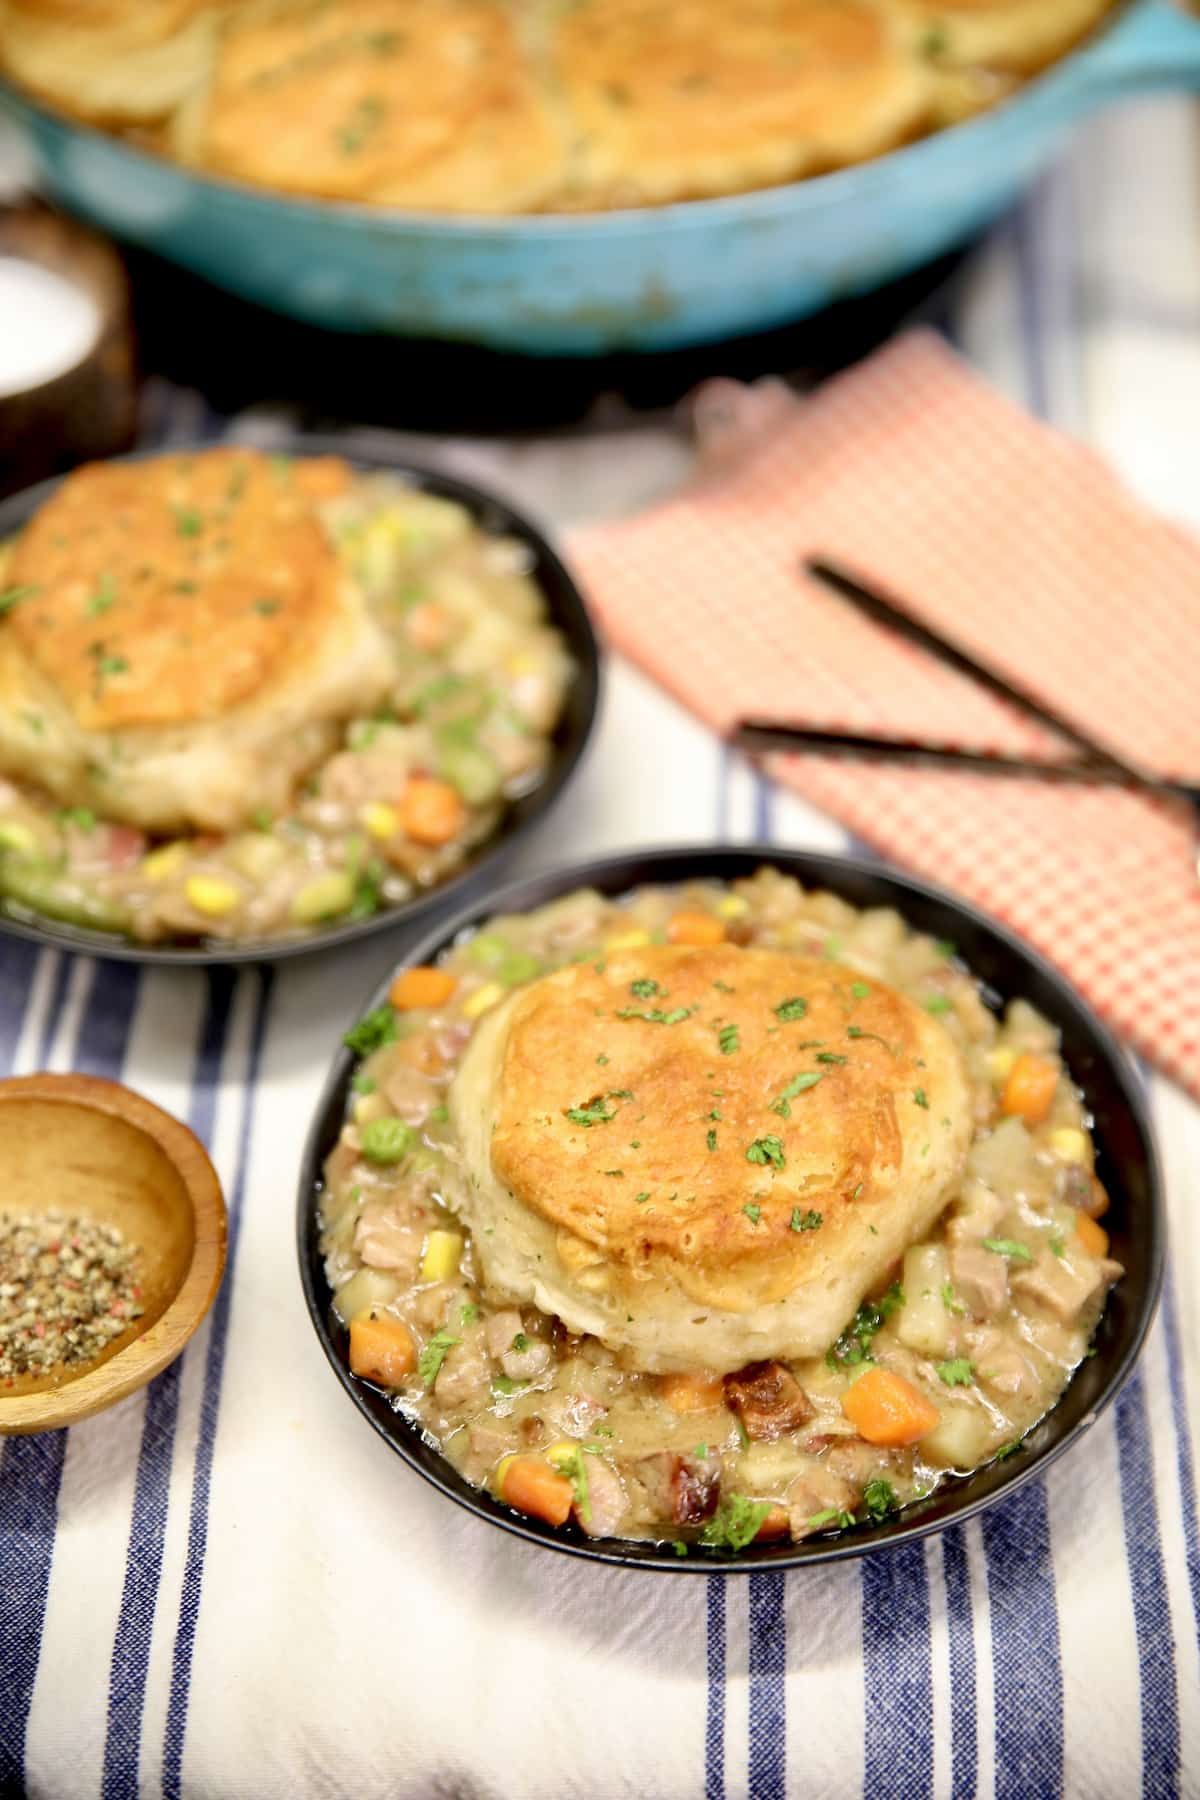 Biscuit topped beef pot pie in bowls.